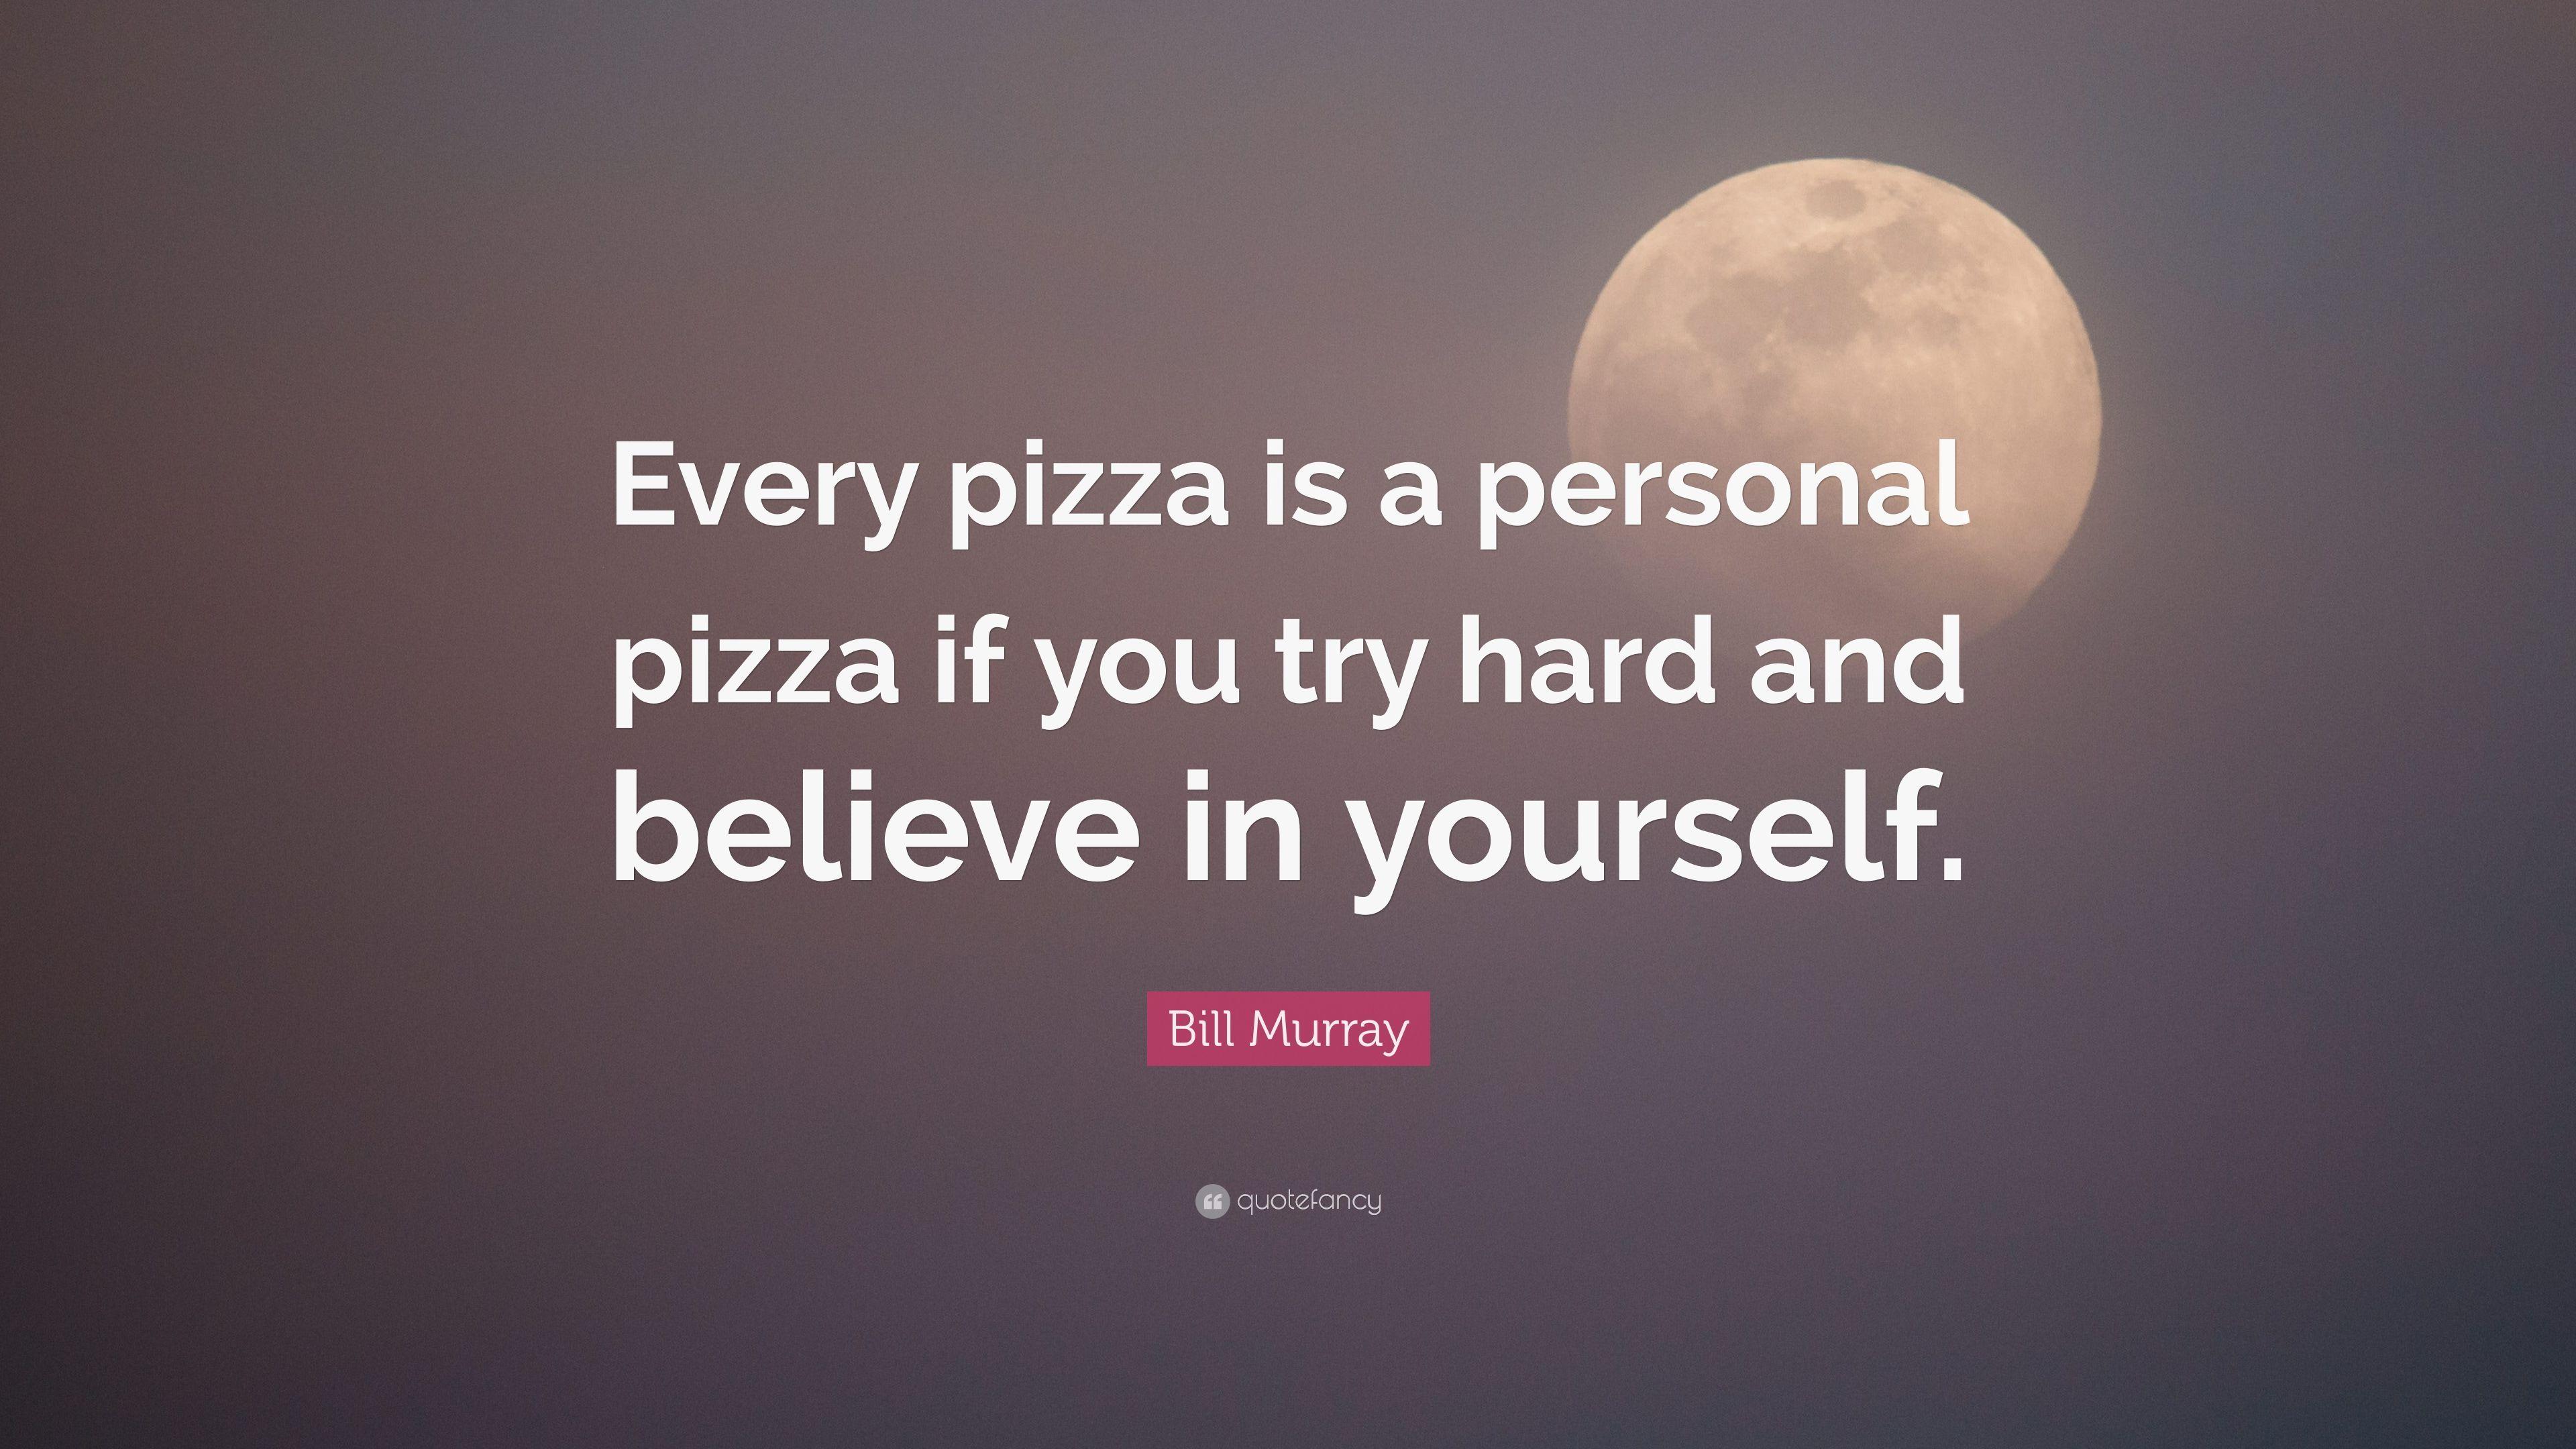 Bill Murray Quote: “Every pizza is a personal pizza if you try